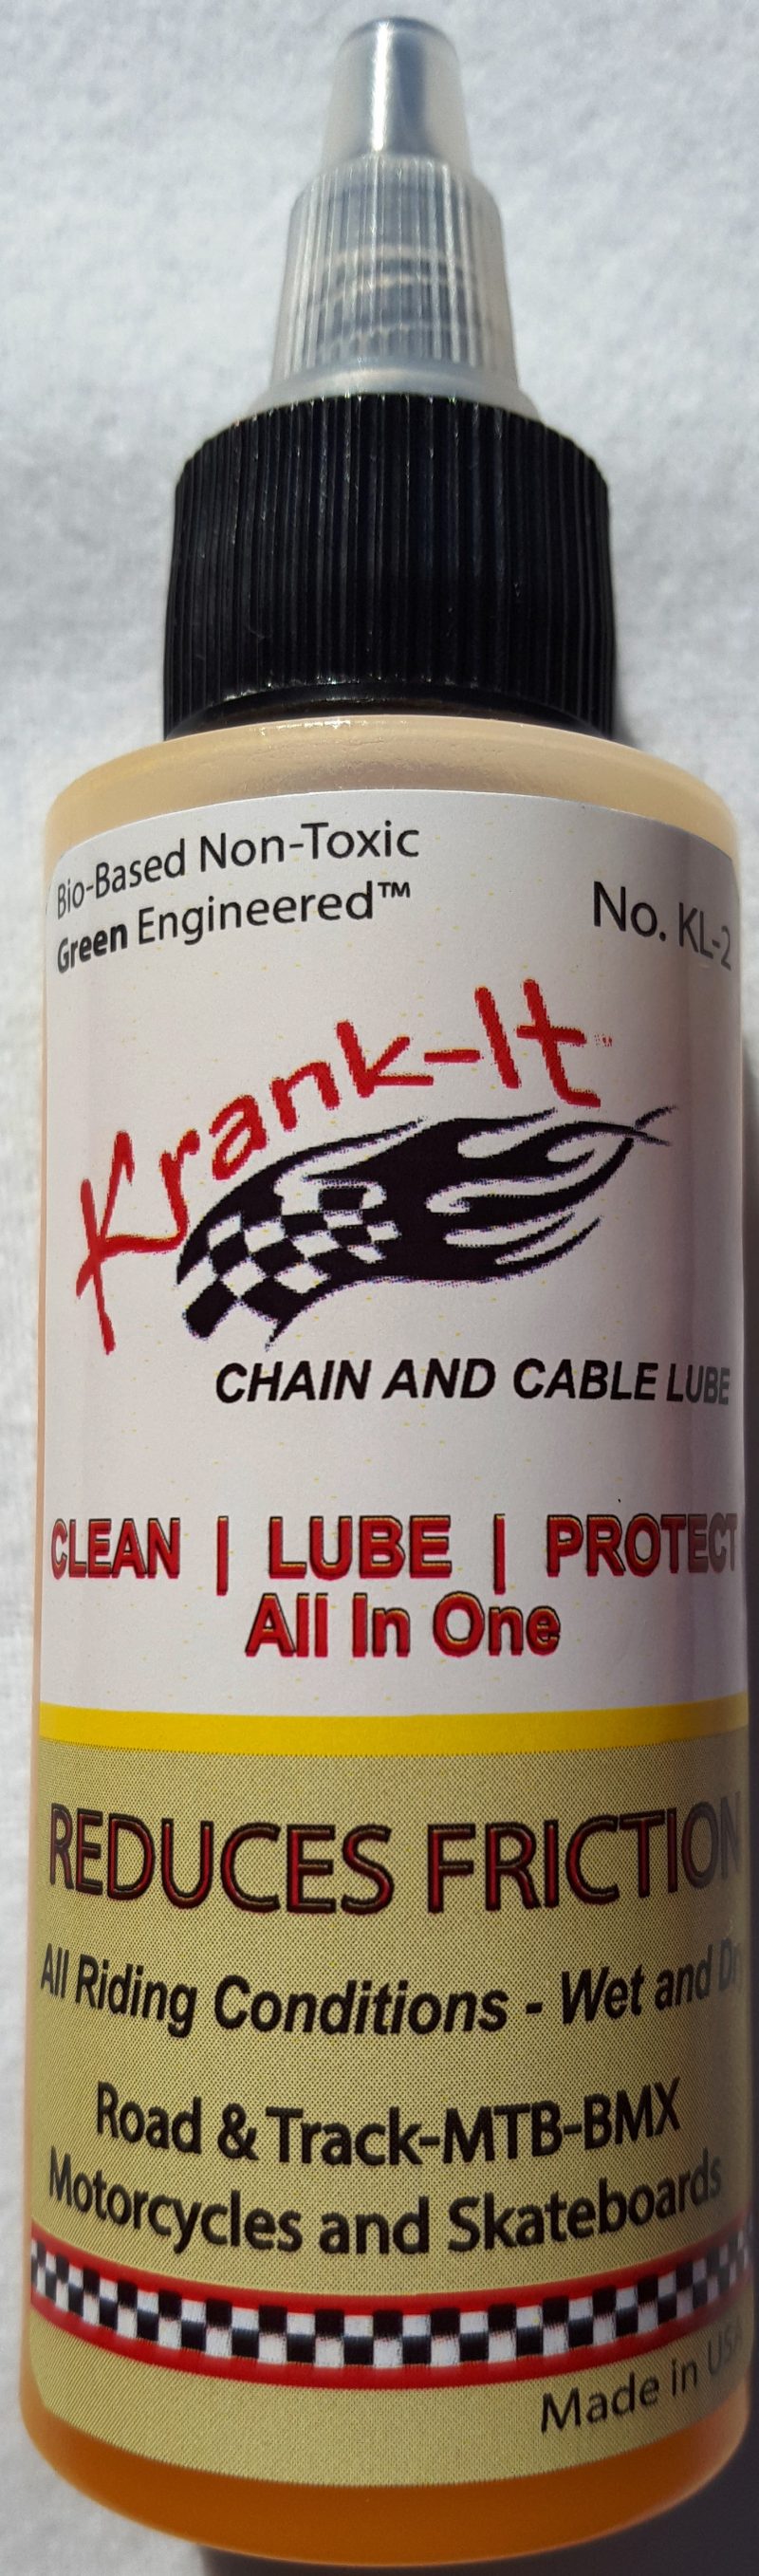 Bio-Based "Green Engineered" Chain and Cable Lube Krank-It™